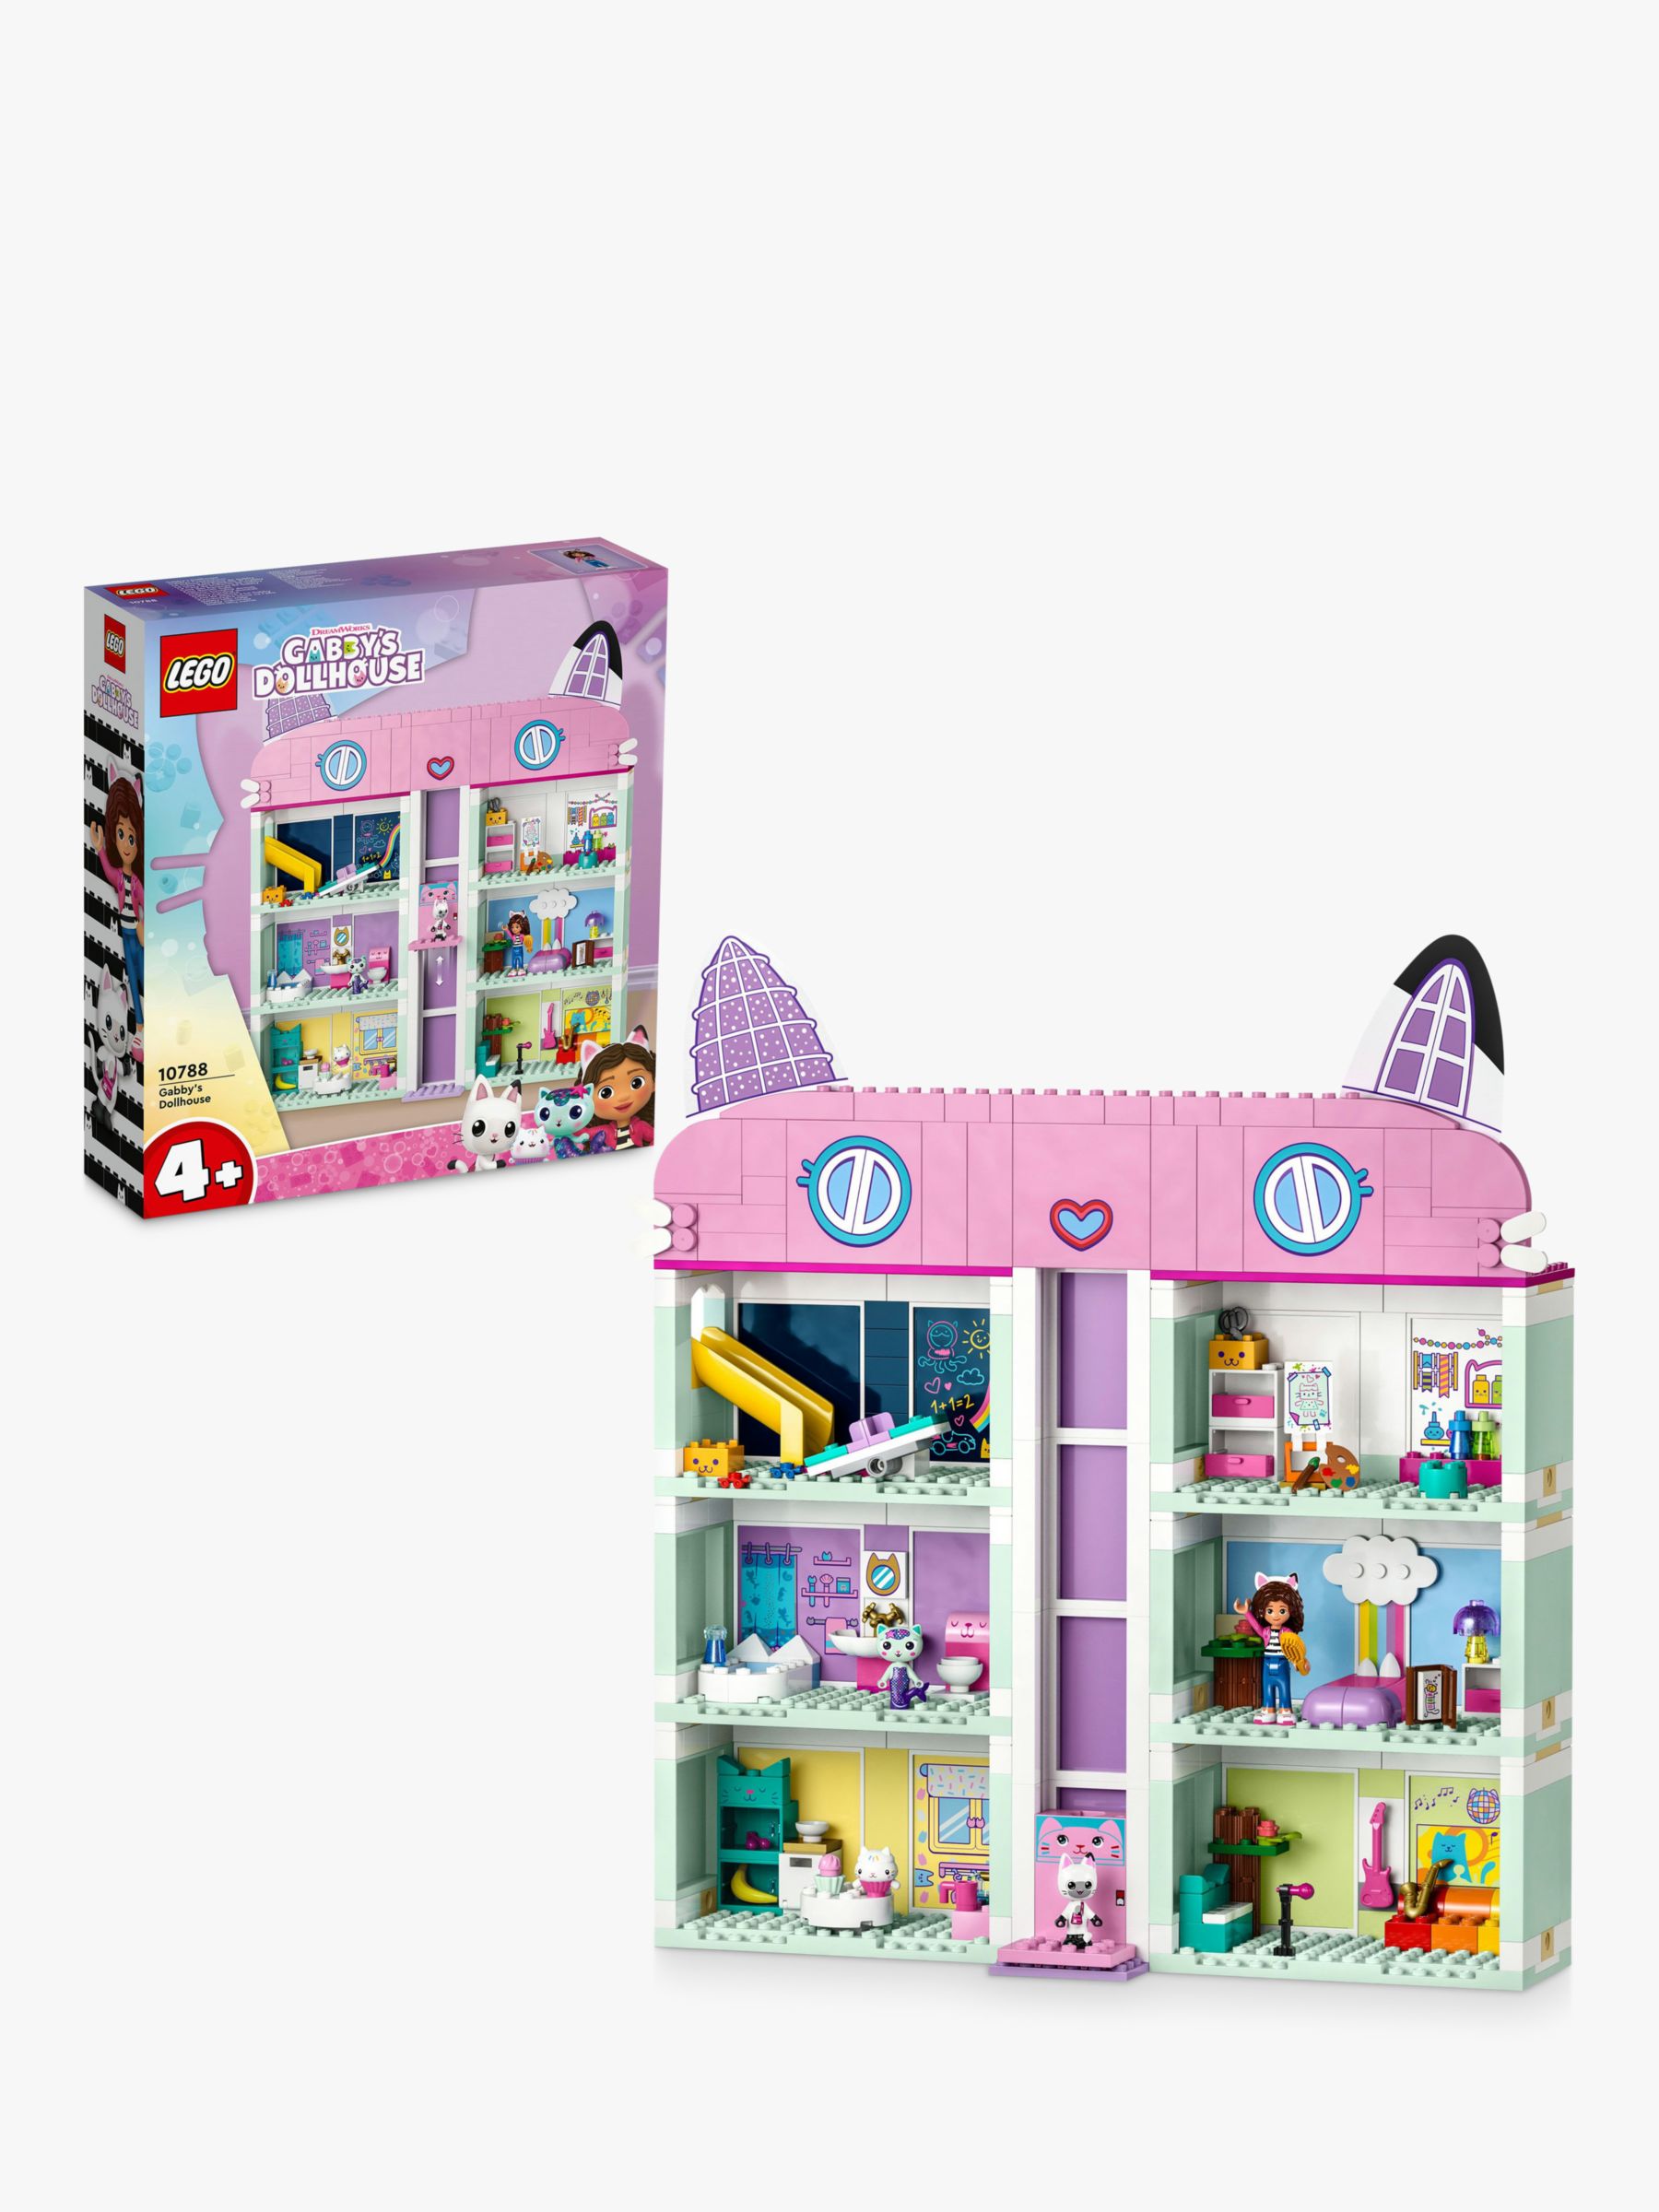 Gabby's Dollhouse Christmas Holiday Activity Bundle for Sale in